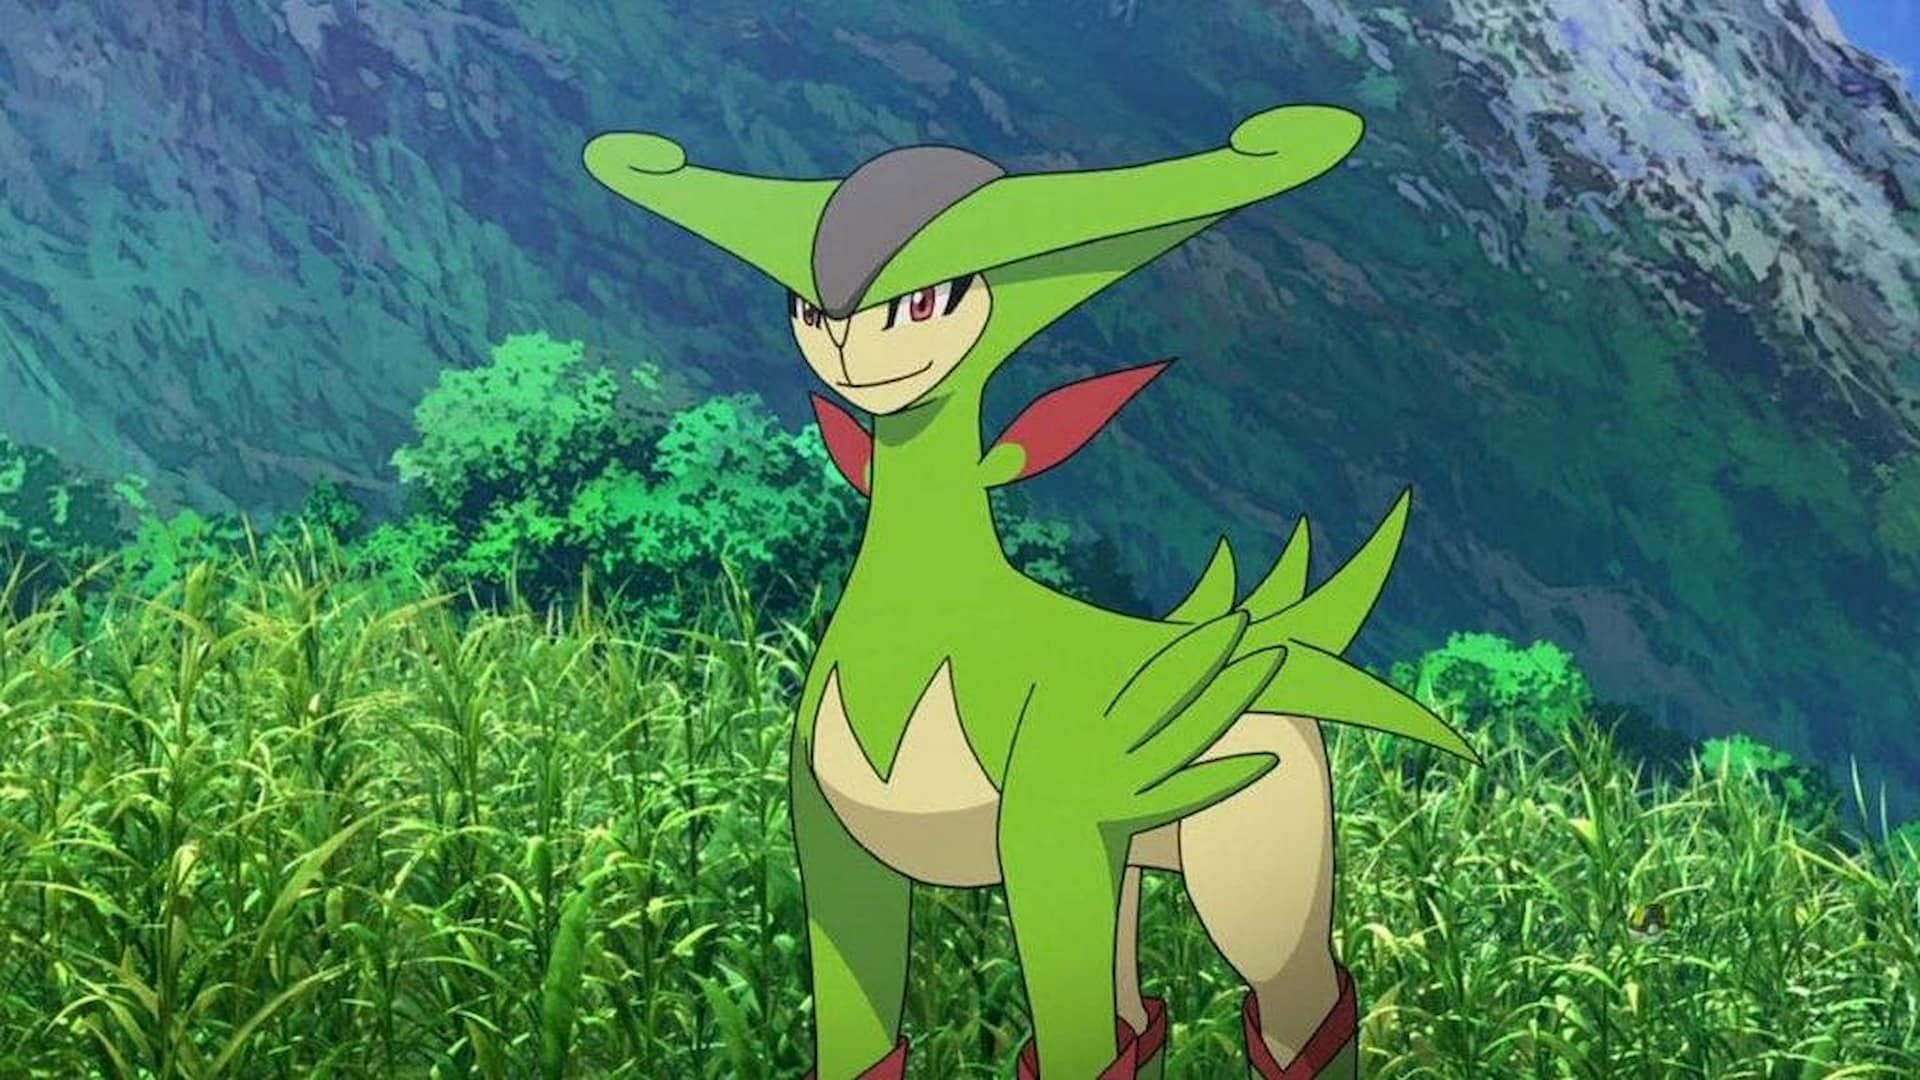 Virizion - a member of the Swords of Justice (Image via The Pokemon Company)